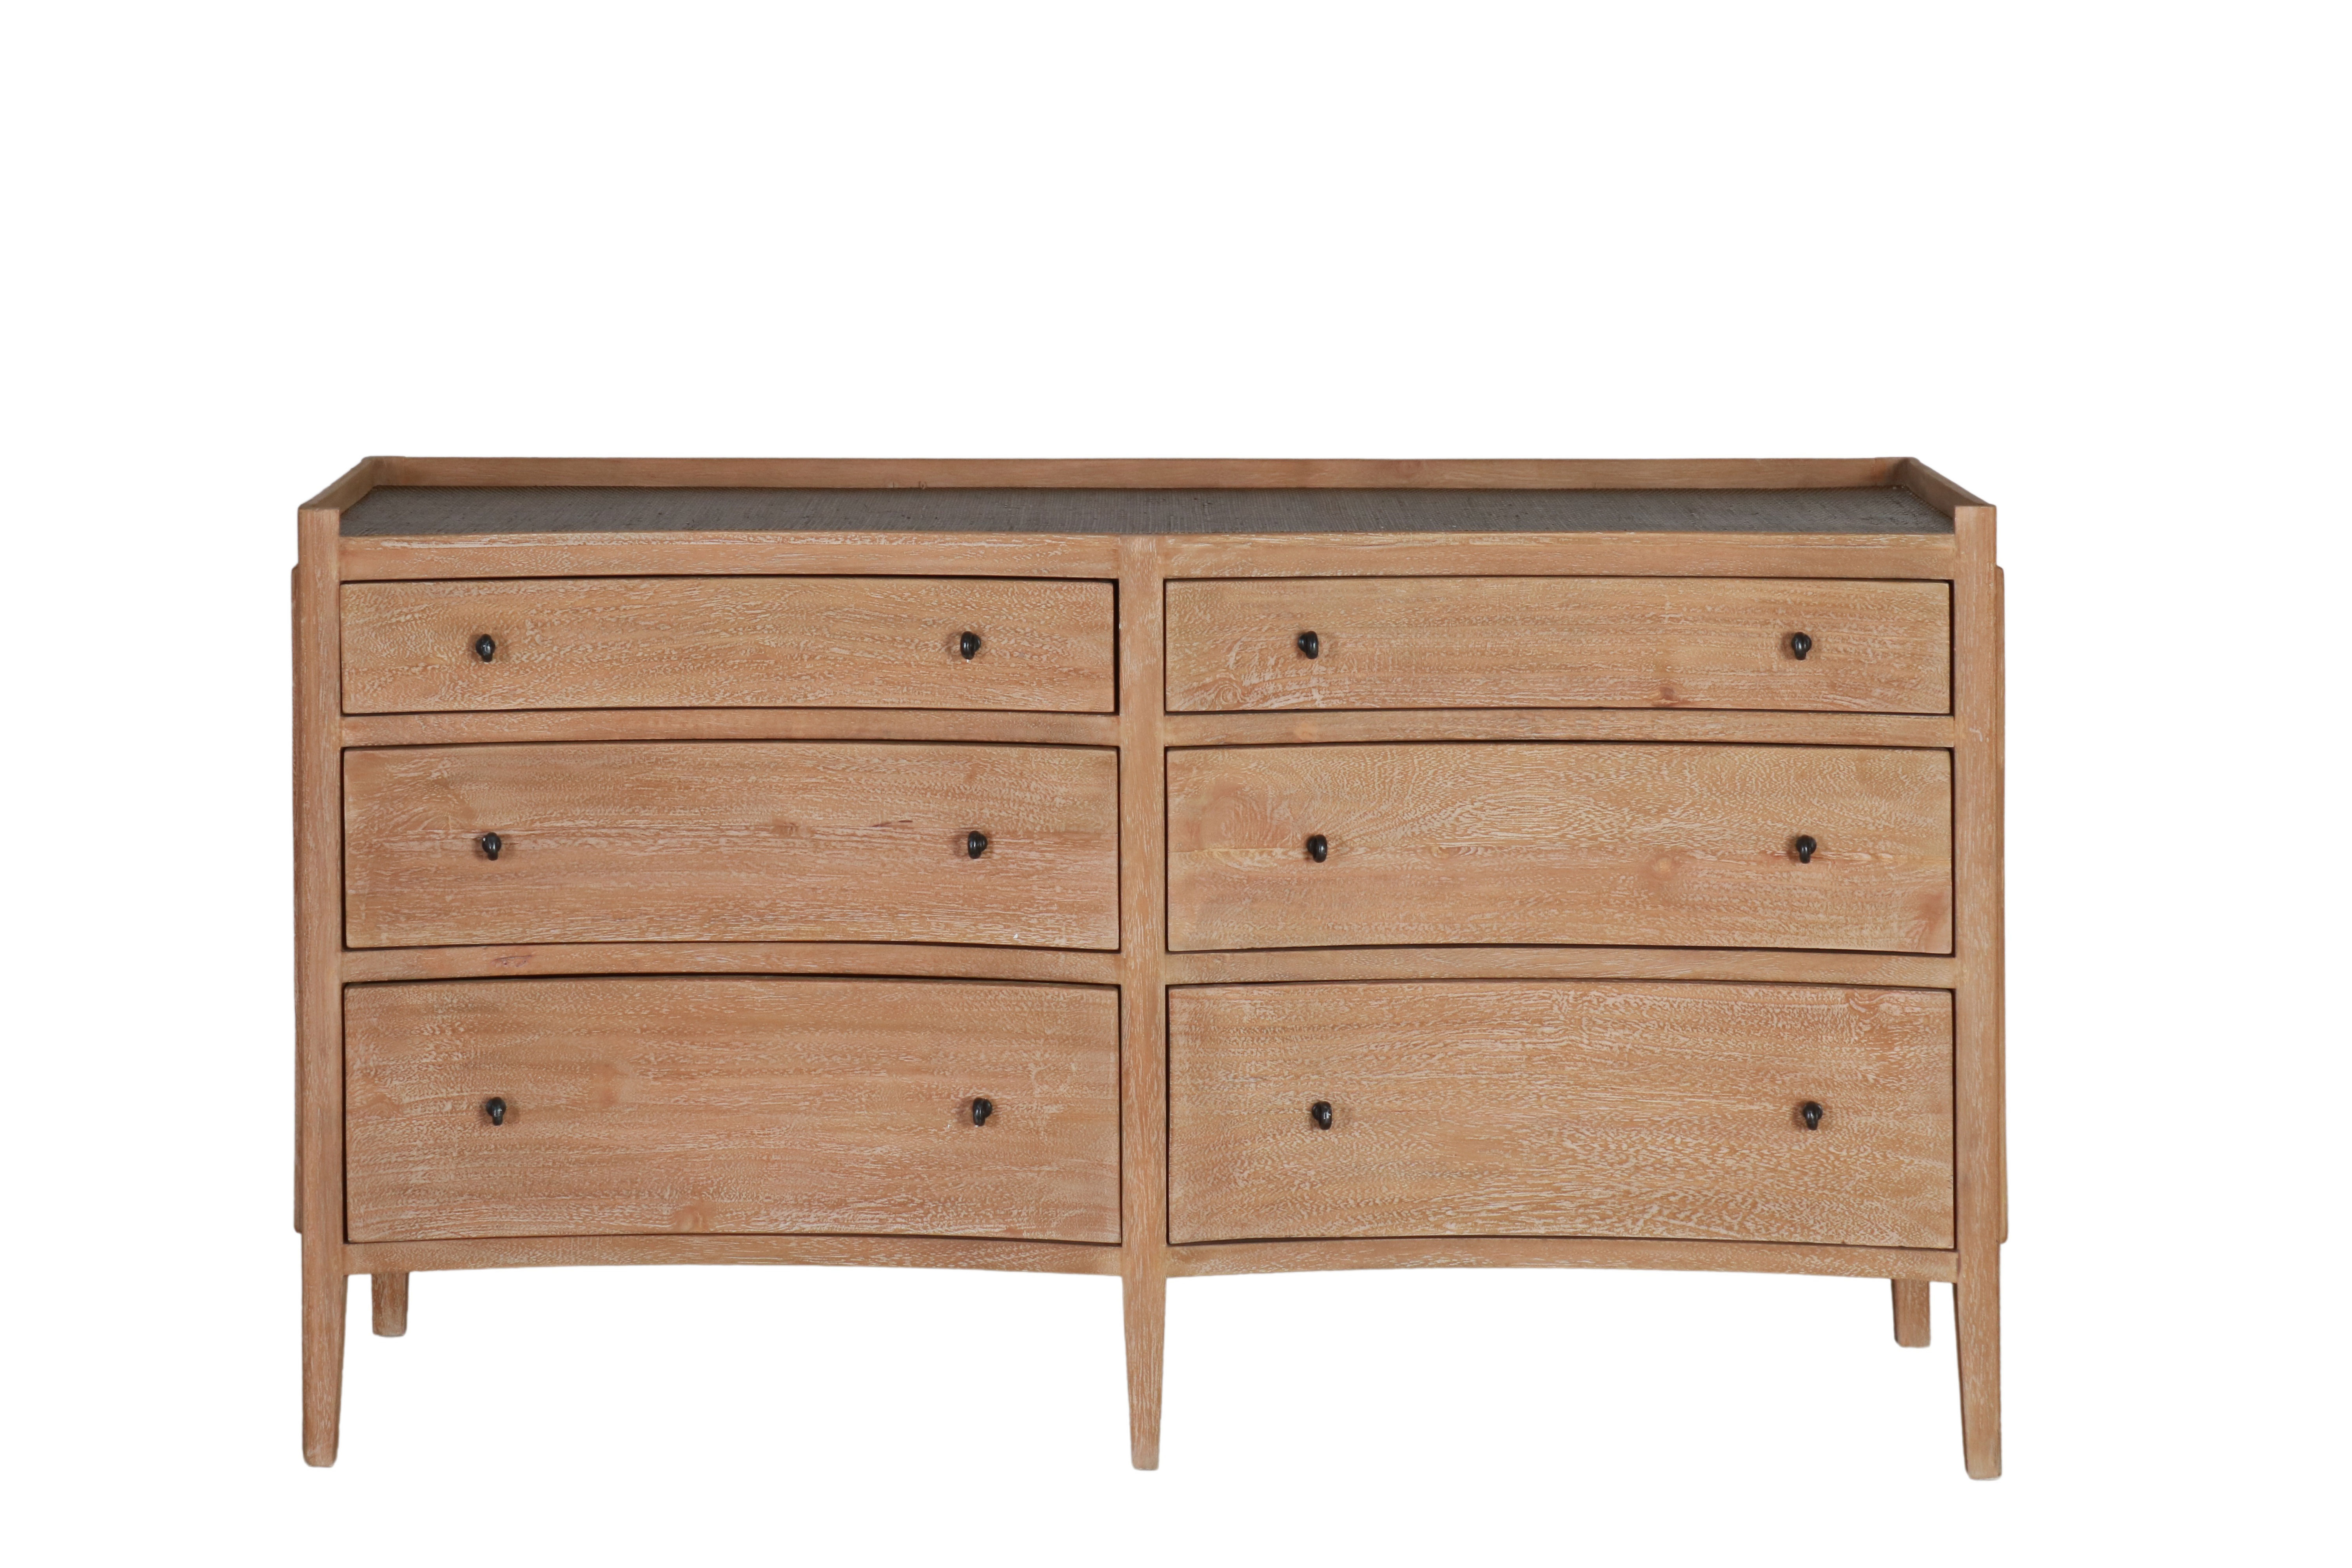 Block and chisel sideboard 6 drawer